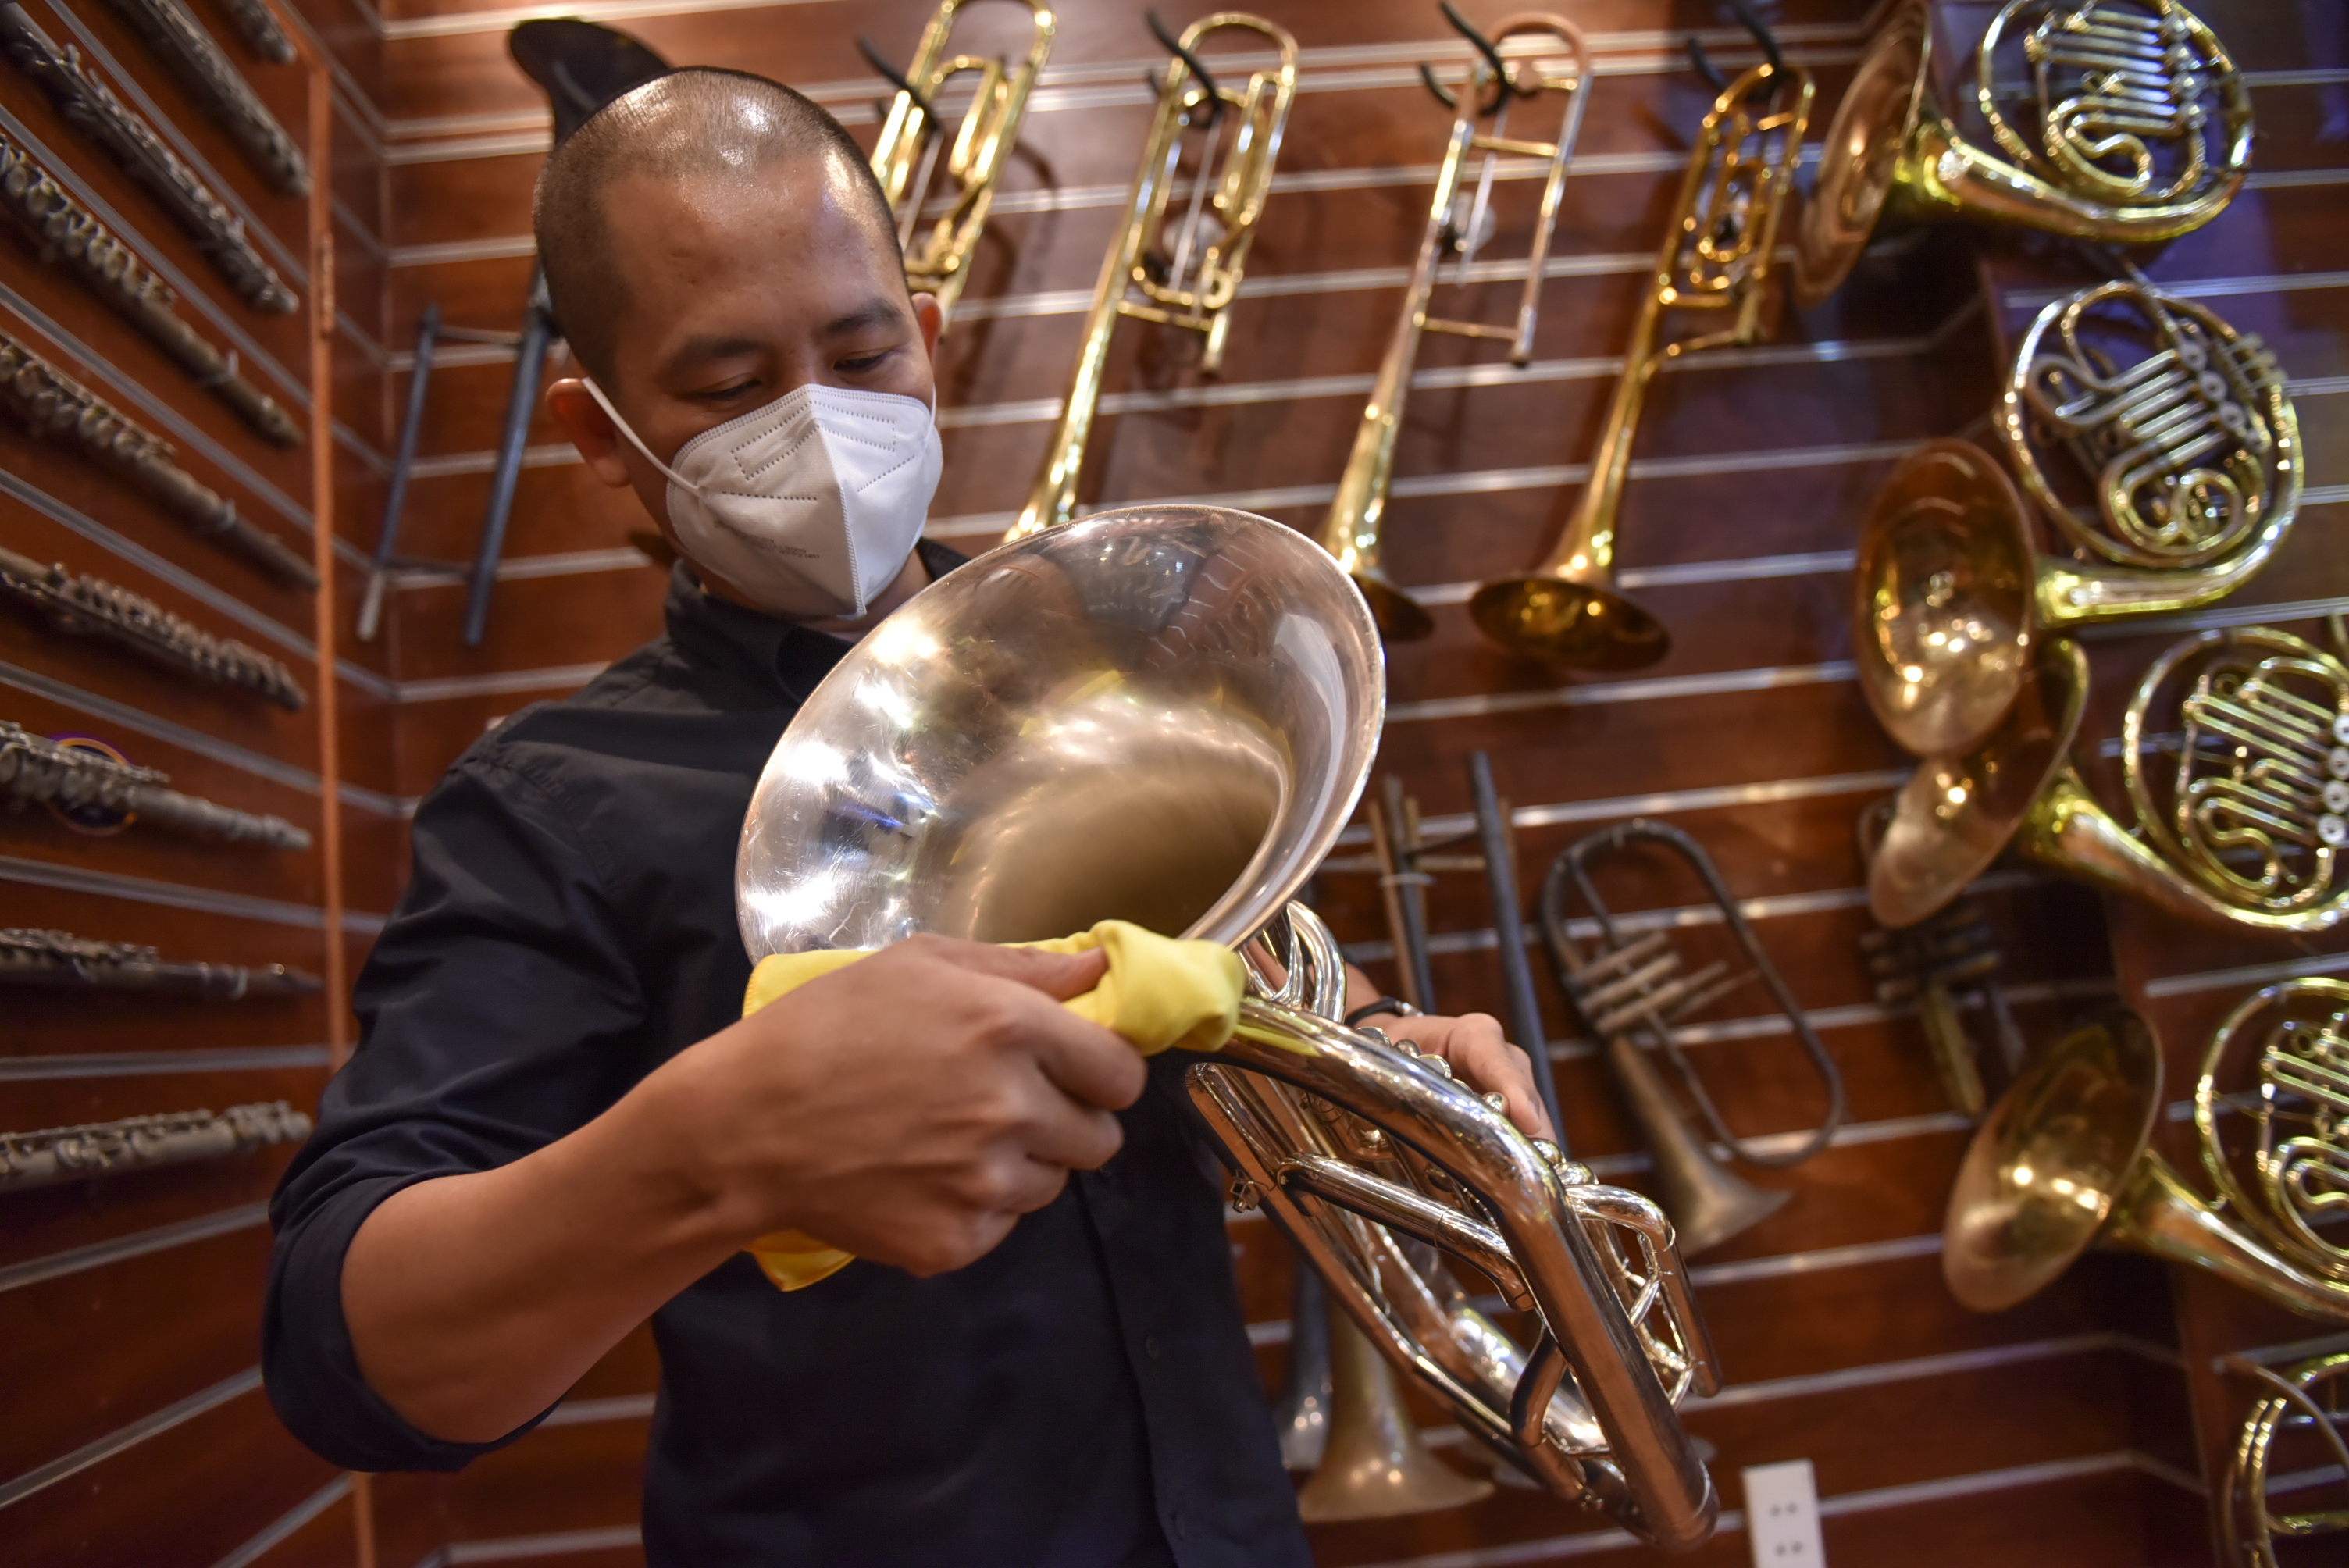 Nguyen Duy Khang cleans an instrument before handing it over to a customer at his repair shop in Tan Phu District in Ho Chi Minh City on December 6, 2021. Photo: Ngoc Phuong / Tuoi Tre News